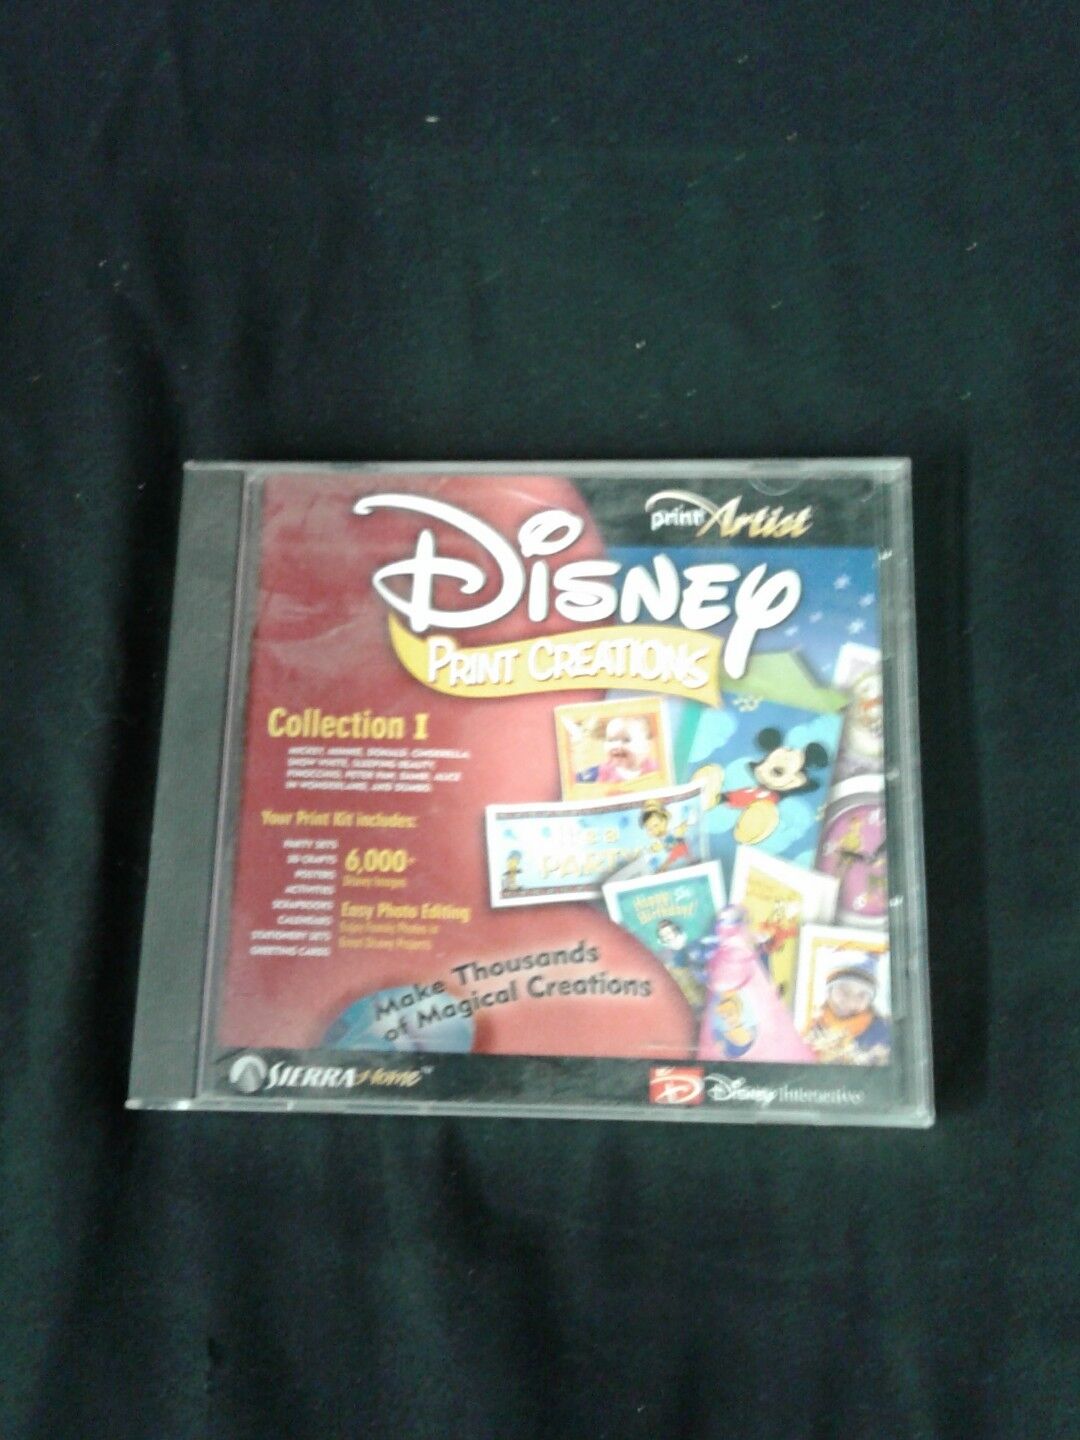 Disney Print Artist Creations Collection 1 PC CD characters projects w/ Mickey